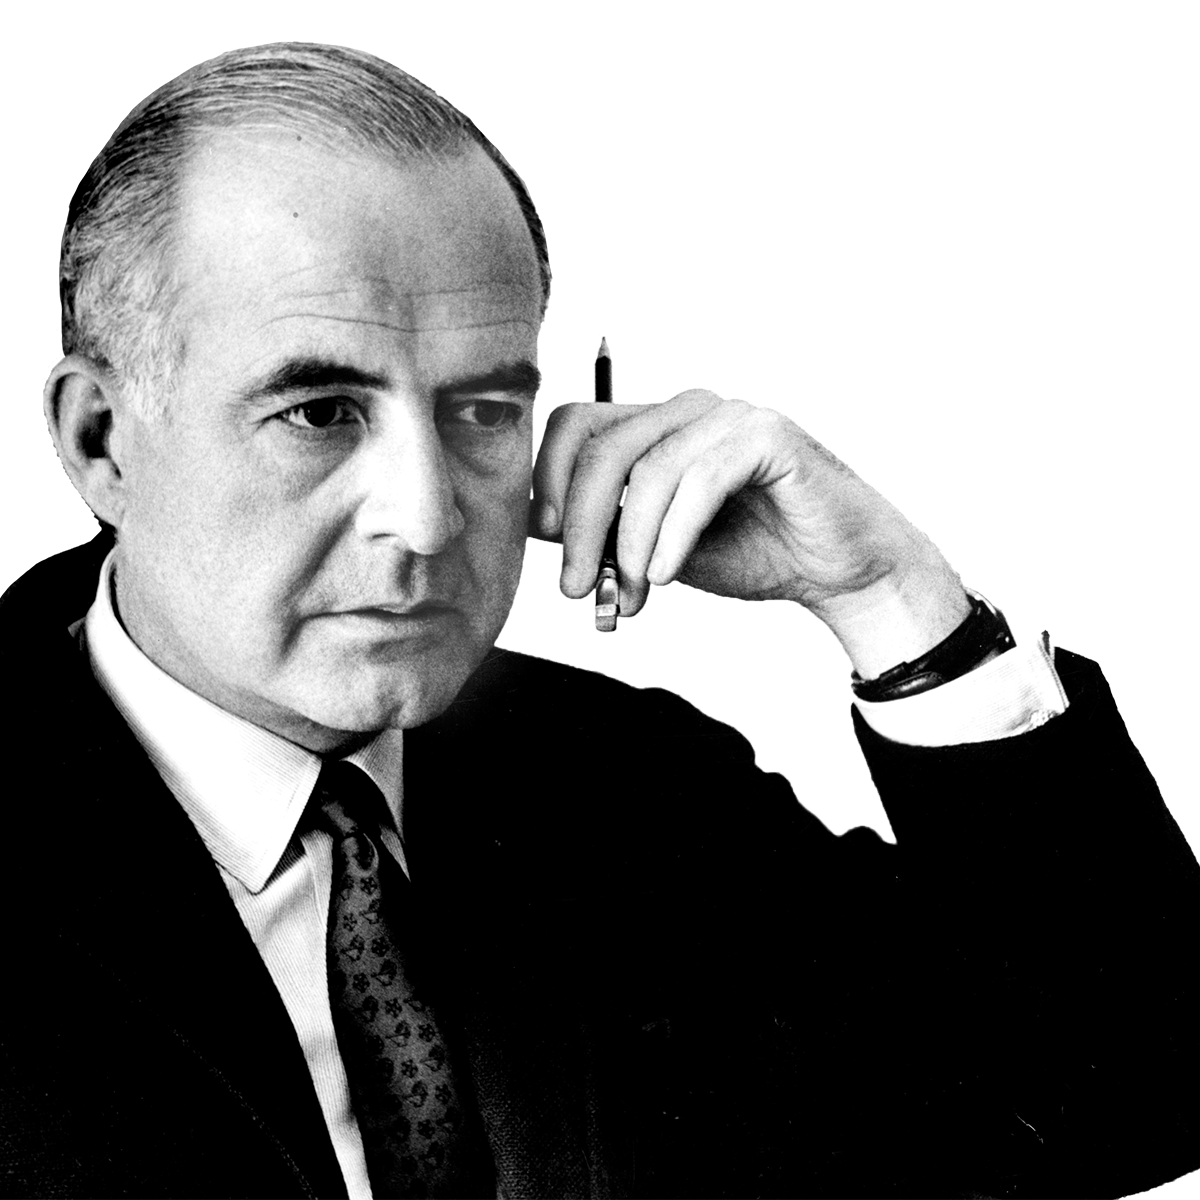 black and white photograph of composer Samuel Barber